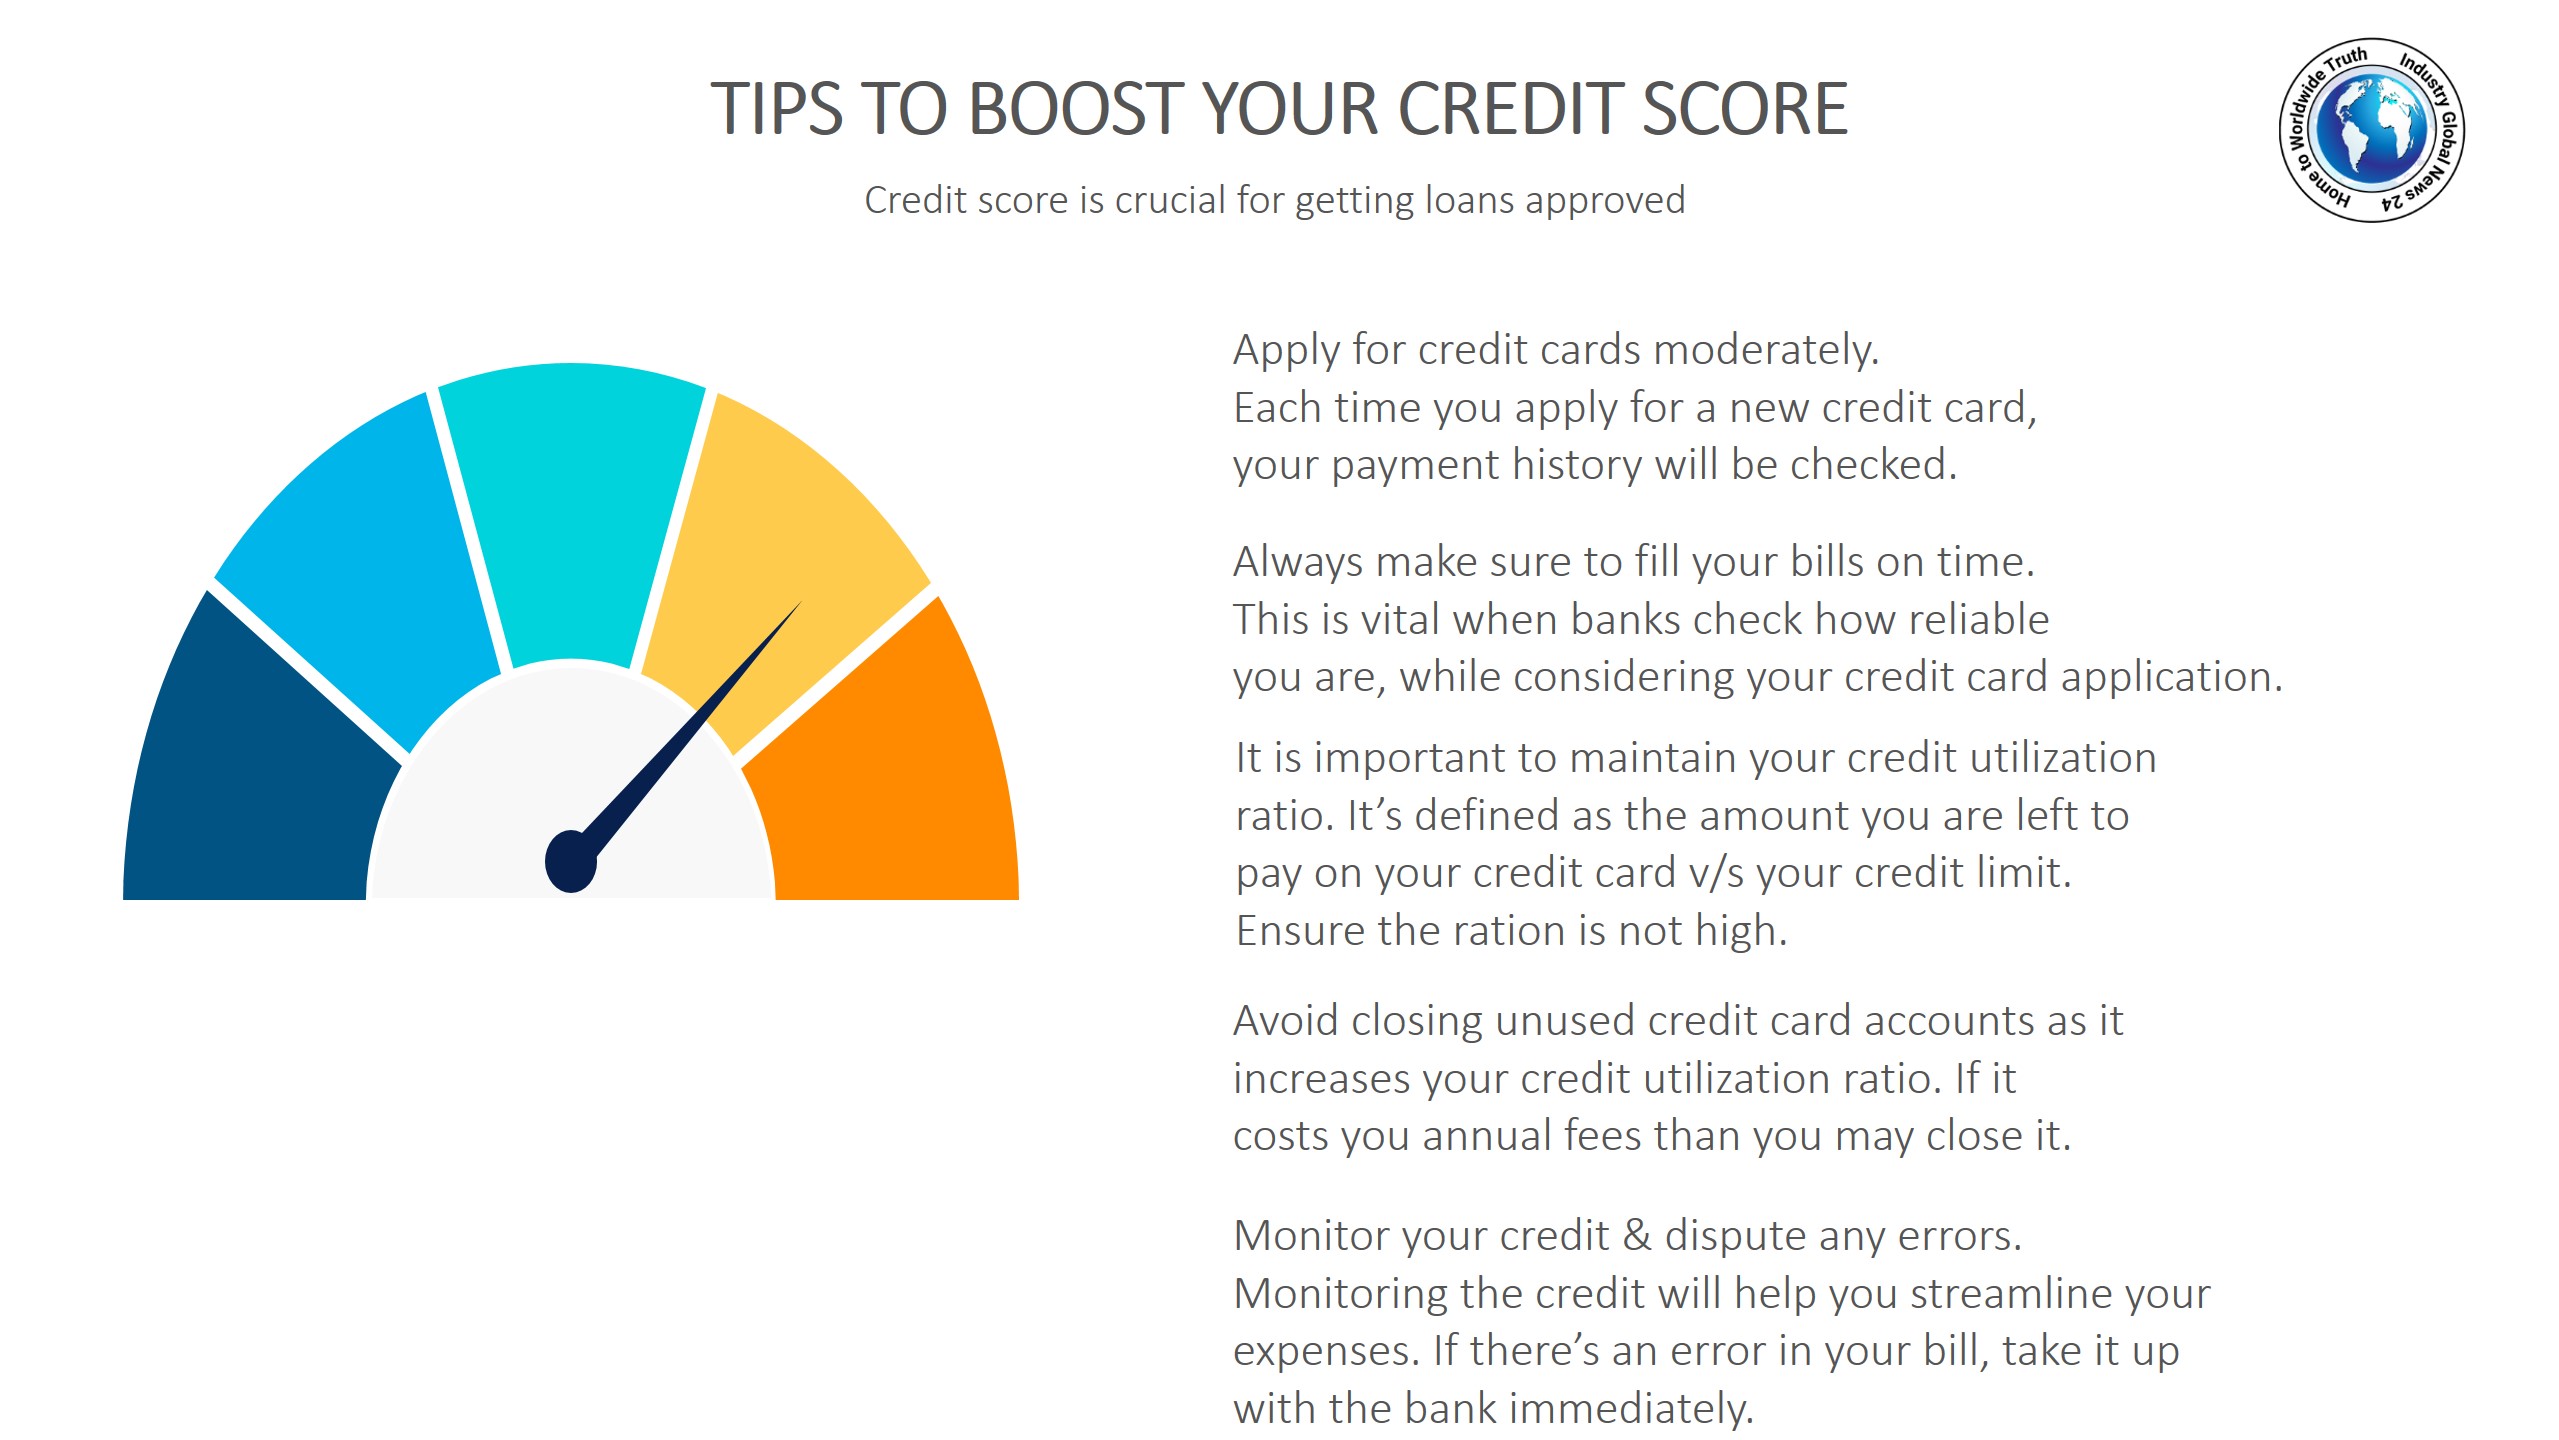 Tips to boost your credit score